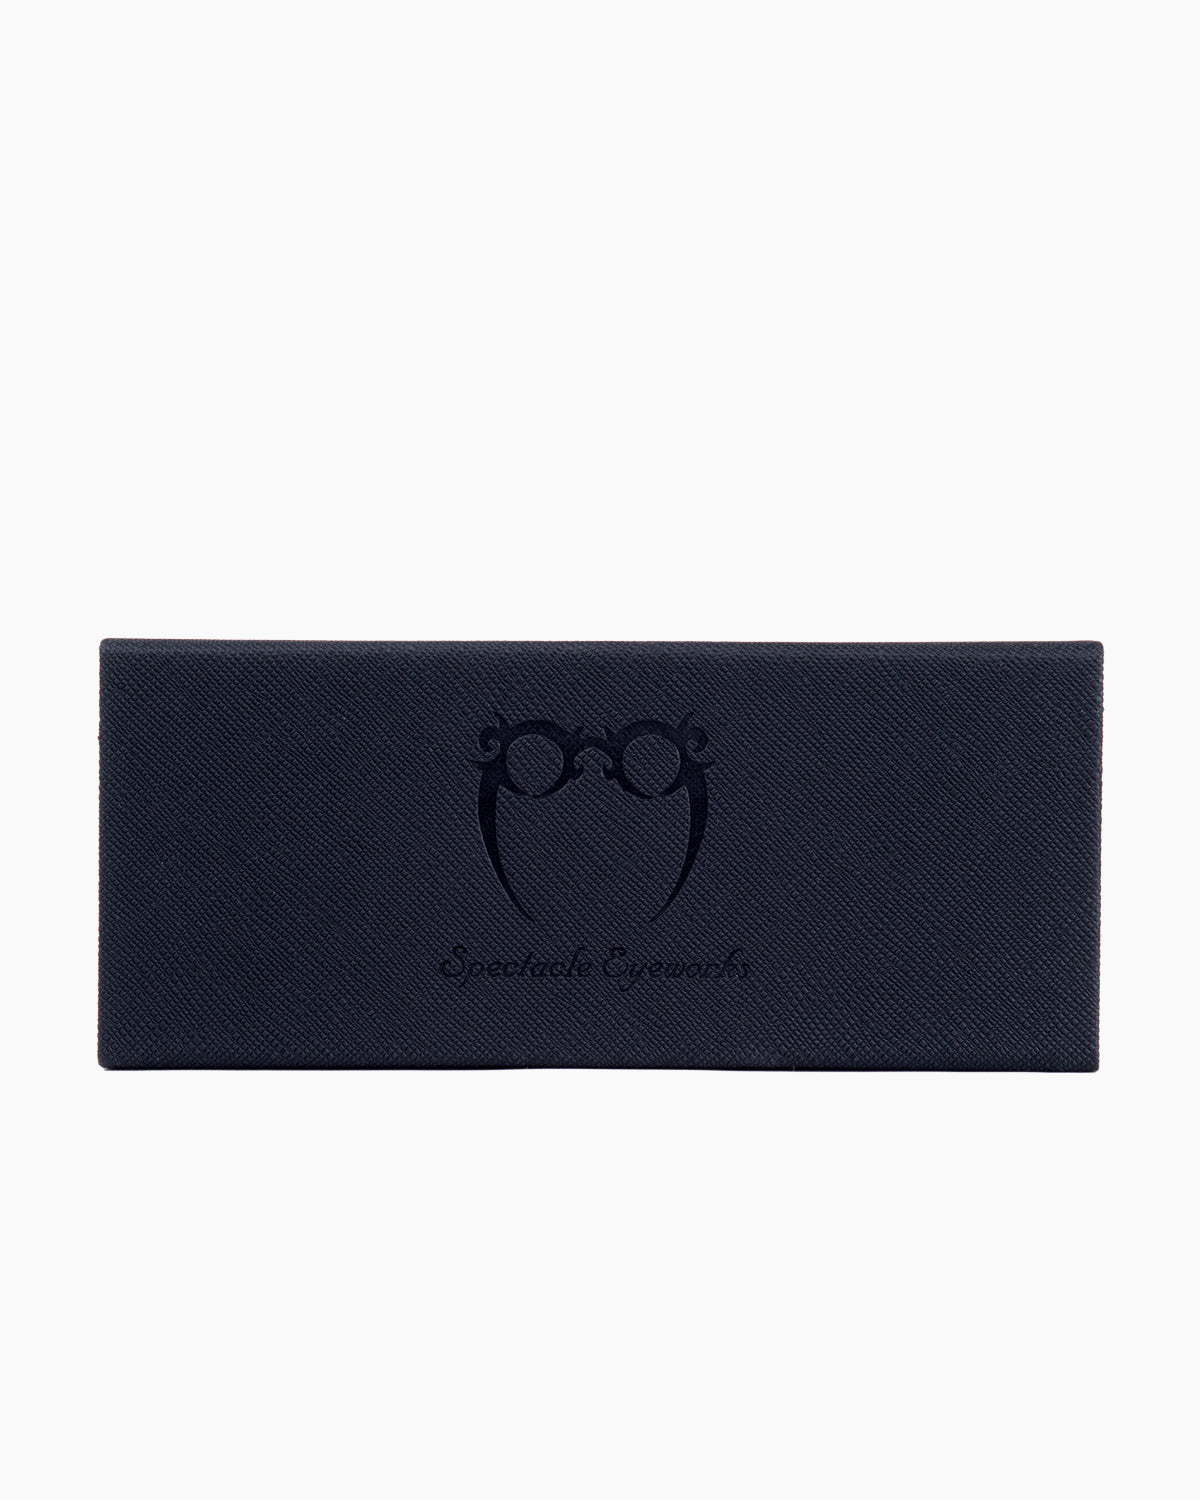 Spectacleeyeworks - Riley - c735 | Bar à lunettes:  Marie-Sophie Dion